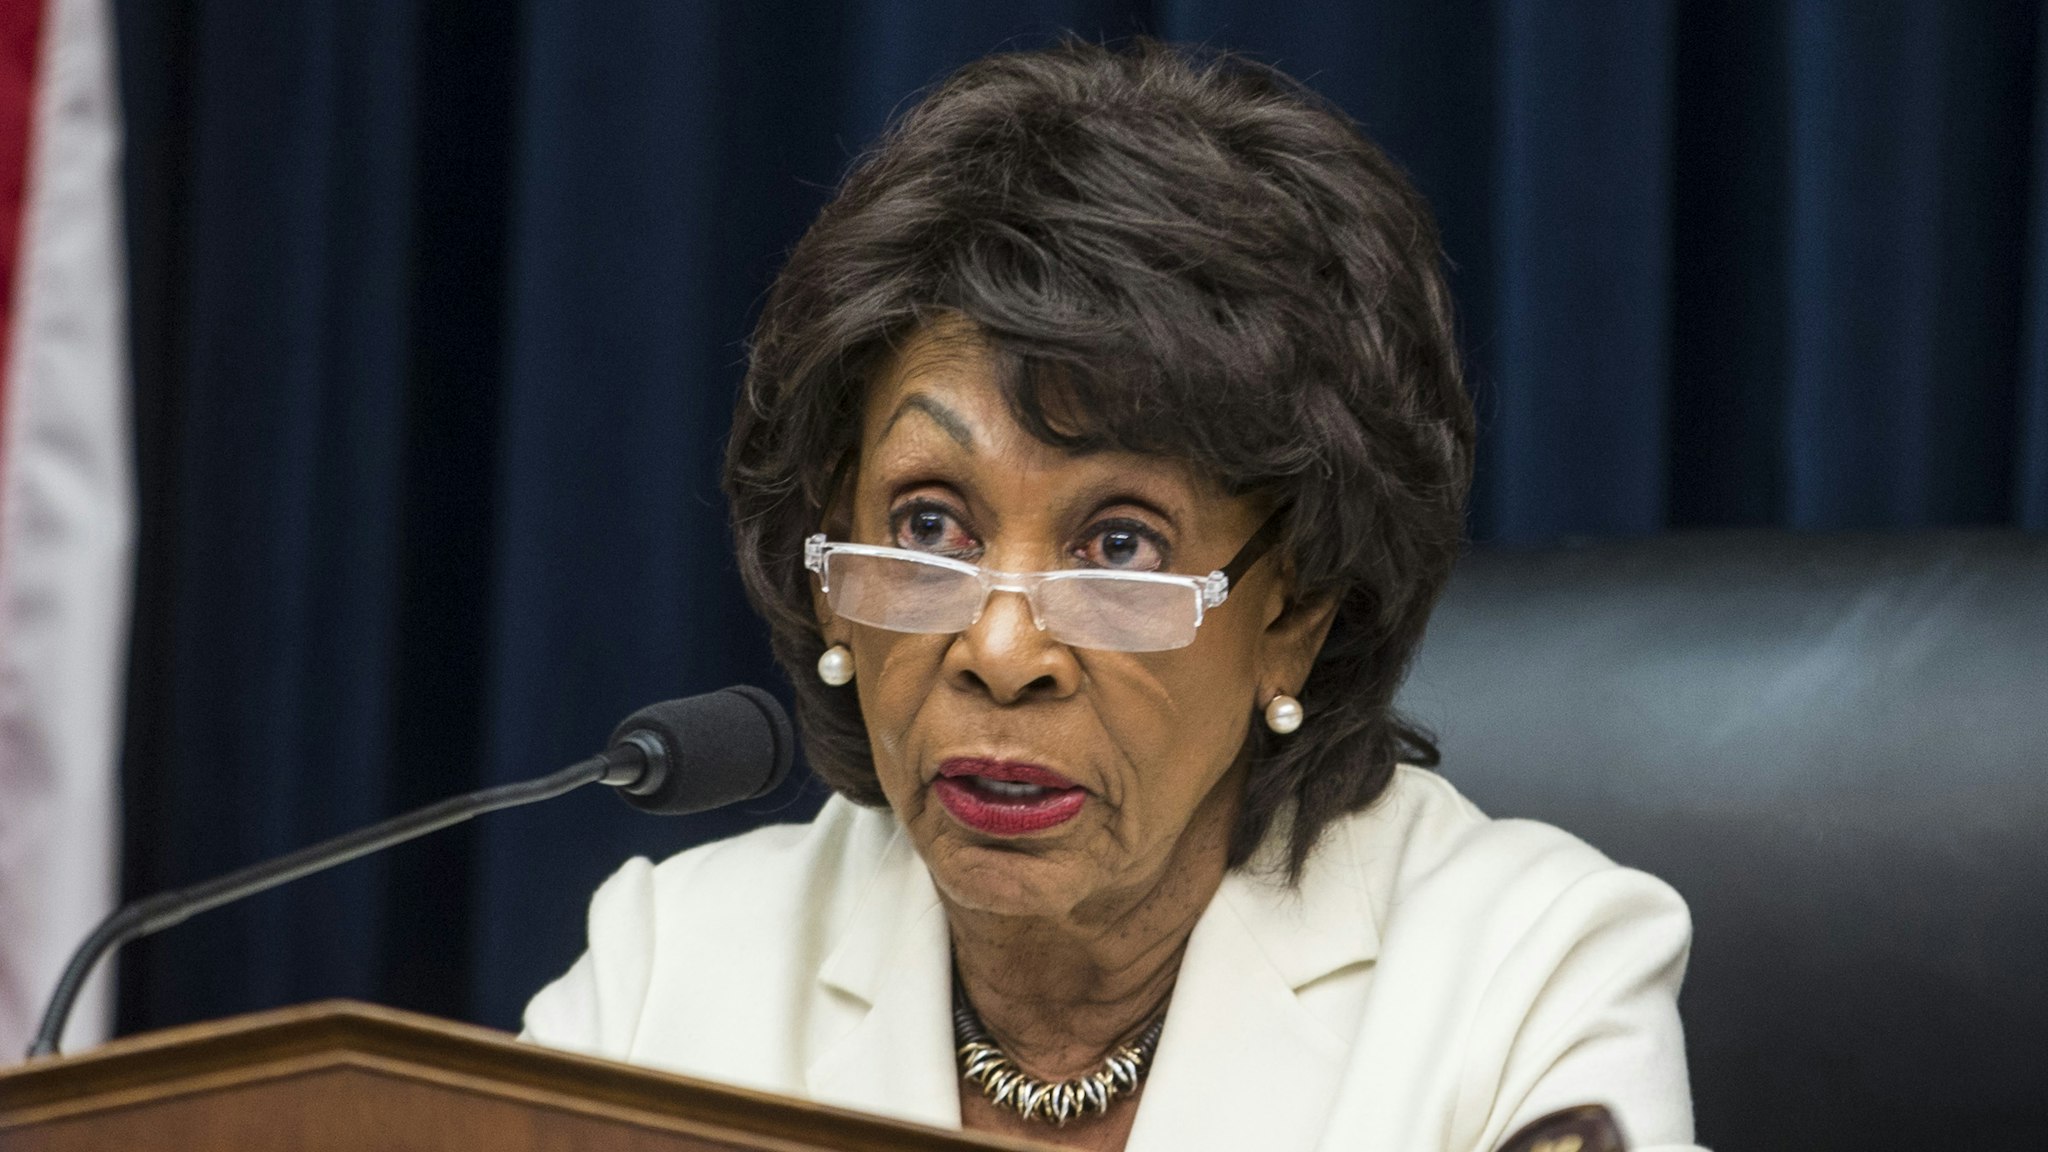 House Financial Services Committee Chairman Maxine Waters (D-CA) speaks during a House Financial Services Committee Hearing on Capitol Hill on April 9, 2019 in Washington, DC. U.S. Secretary of Treasury Steve Mnuchin is testifying on the state of the international financial system.